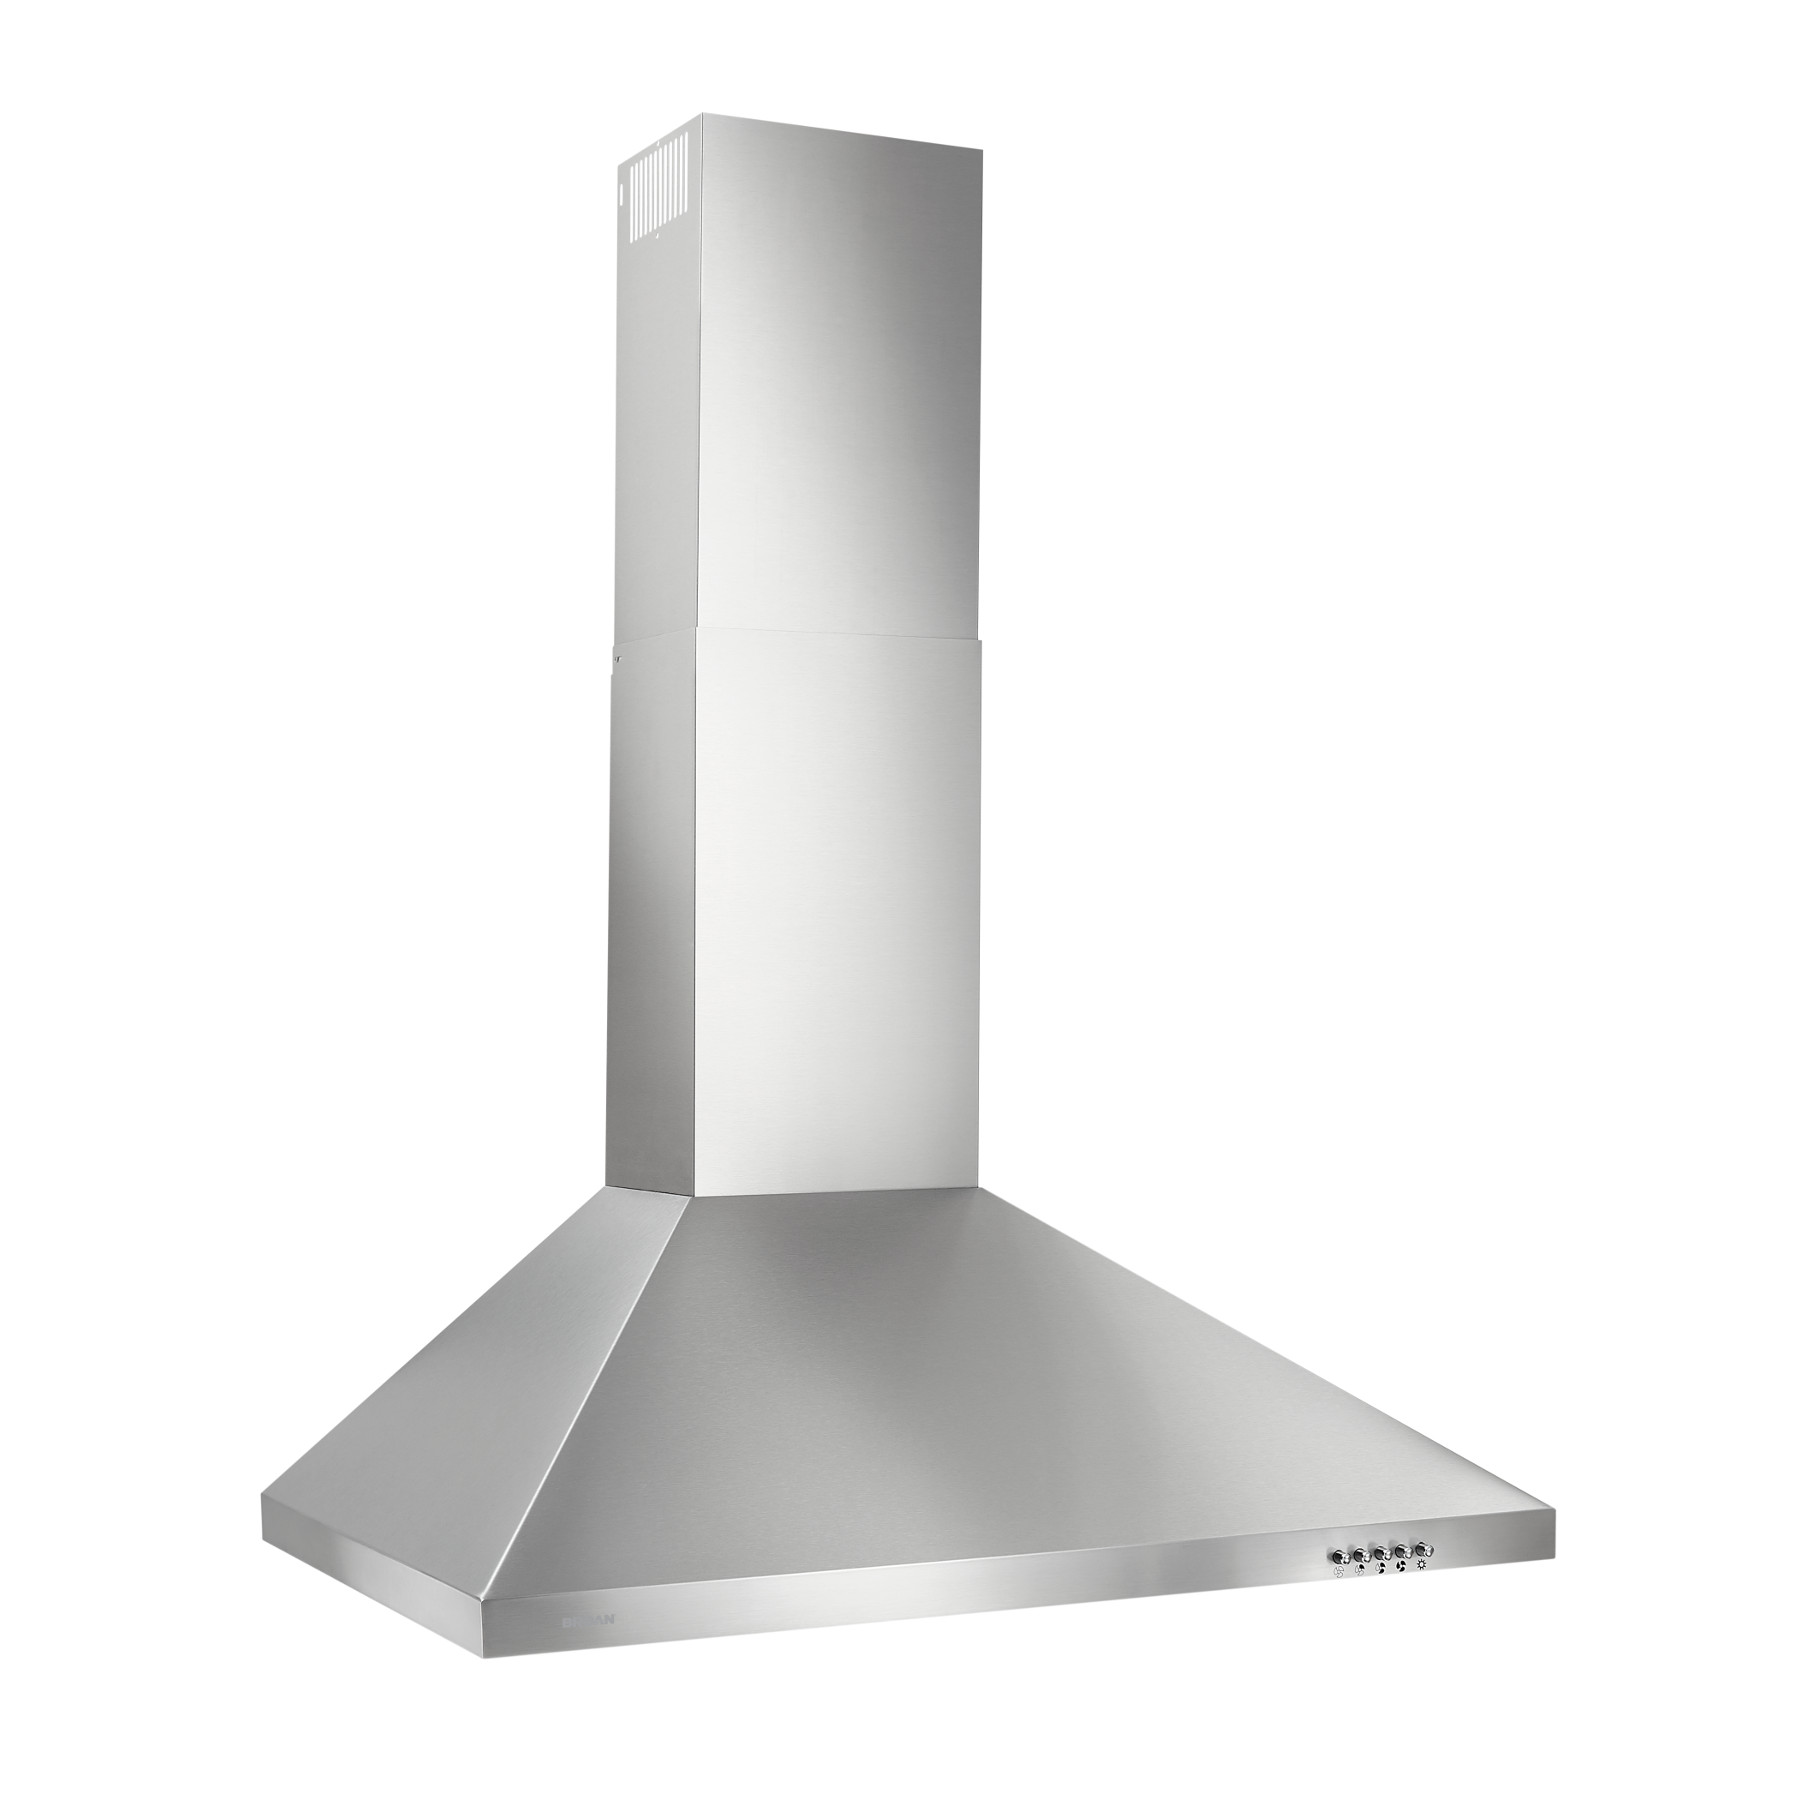 30" New Europe Exhaust Stainless Steel Glass Wall Mount Kitchen Vent Range Hood 